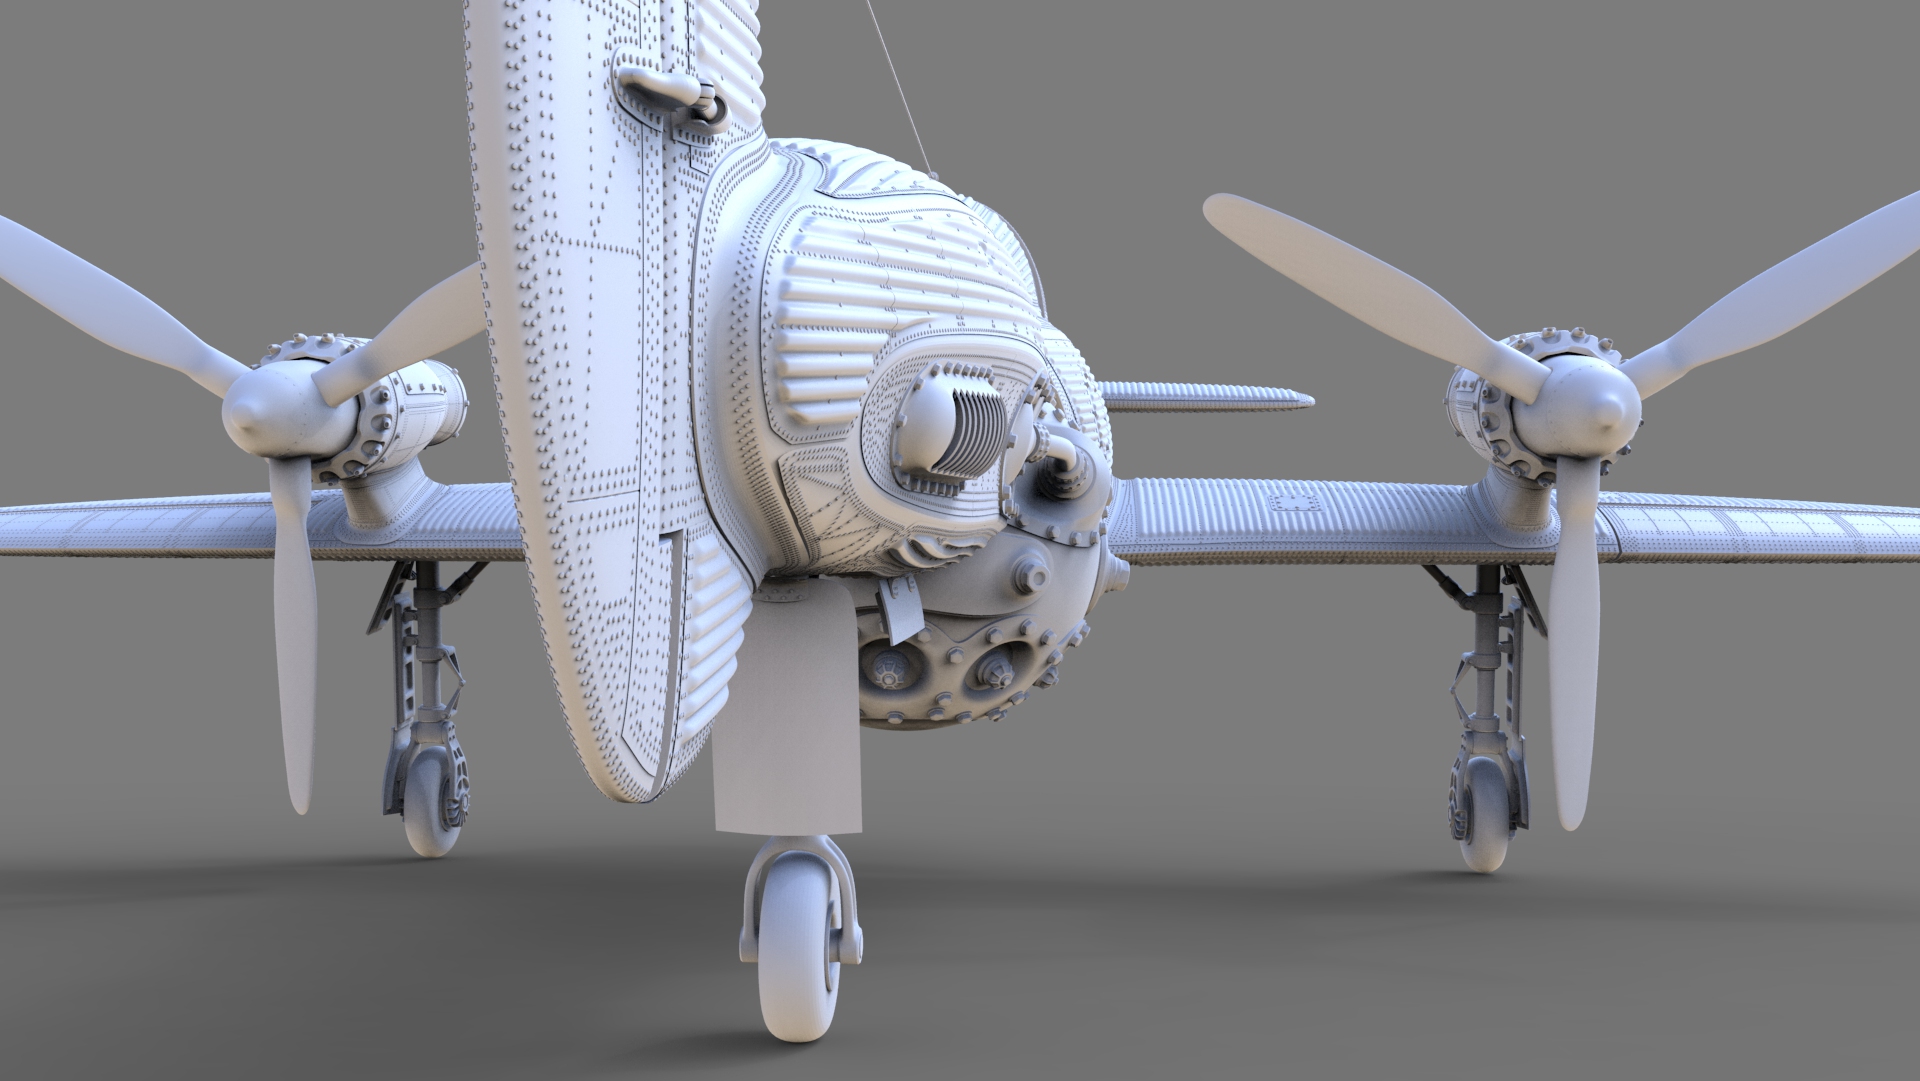 4 axis plane zbrush